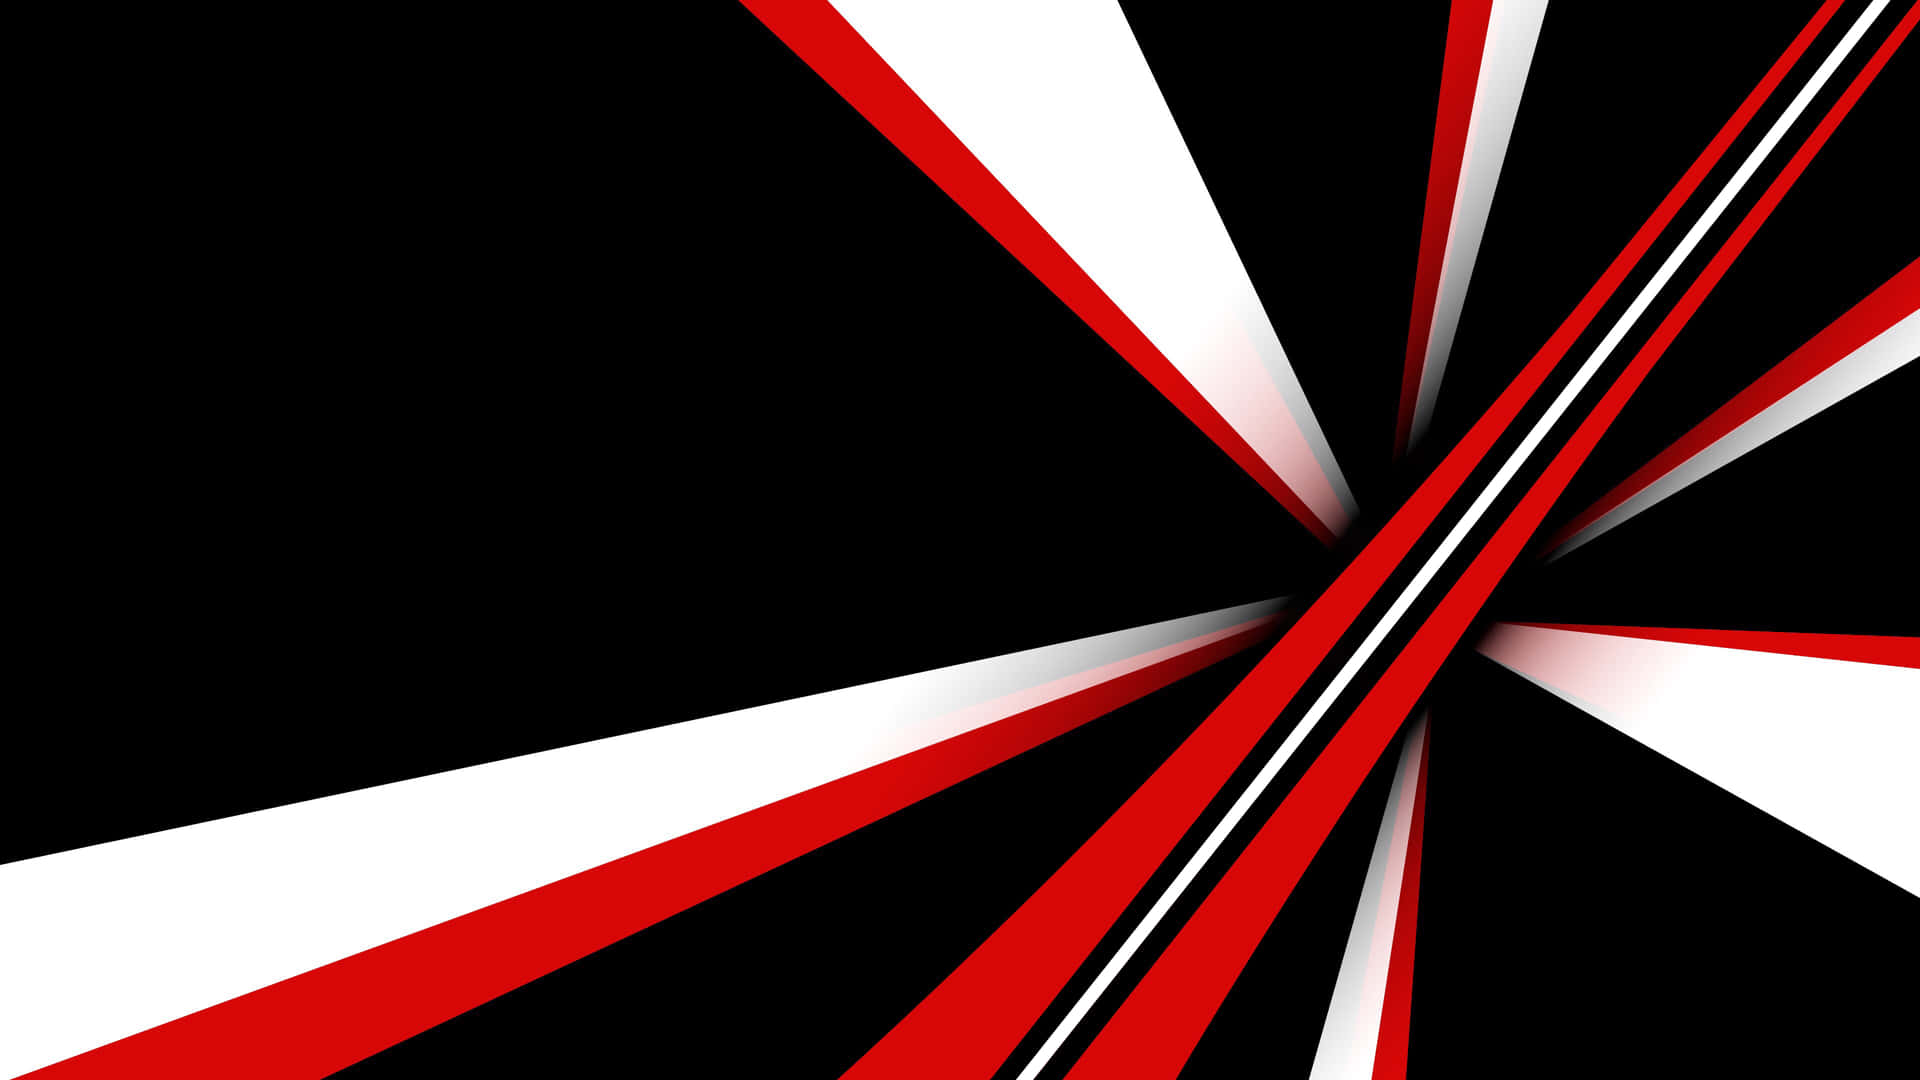 A Black And Red Abstract Background With Lines Wallpaper